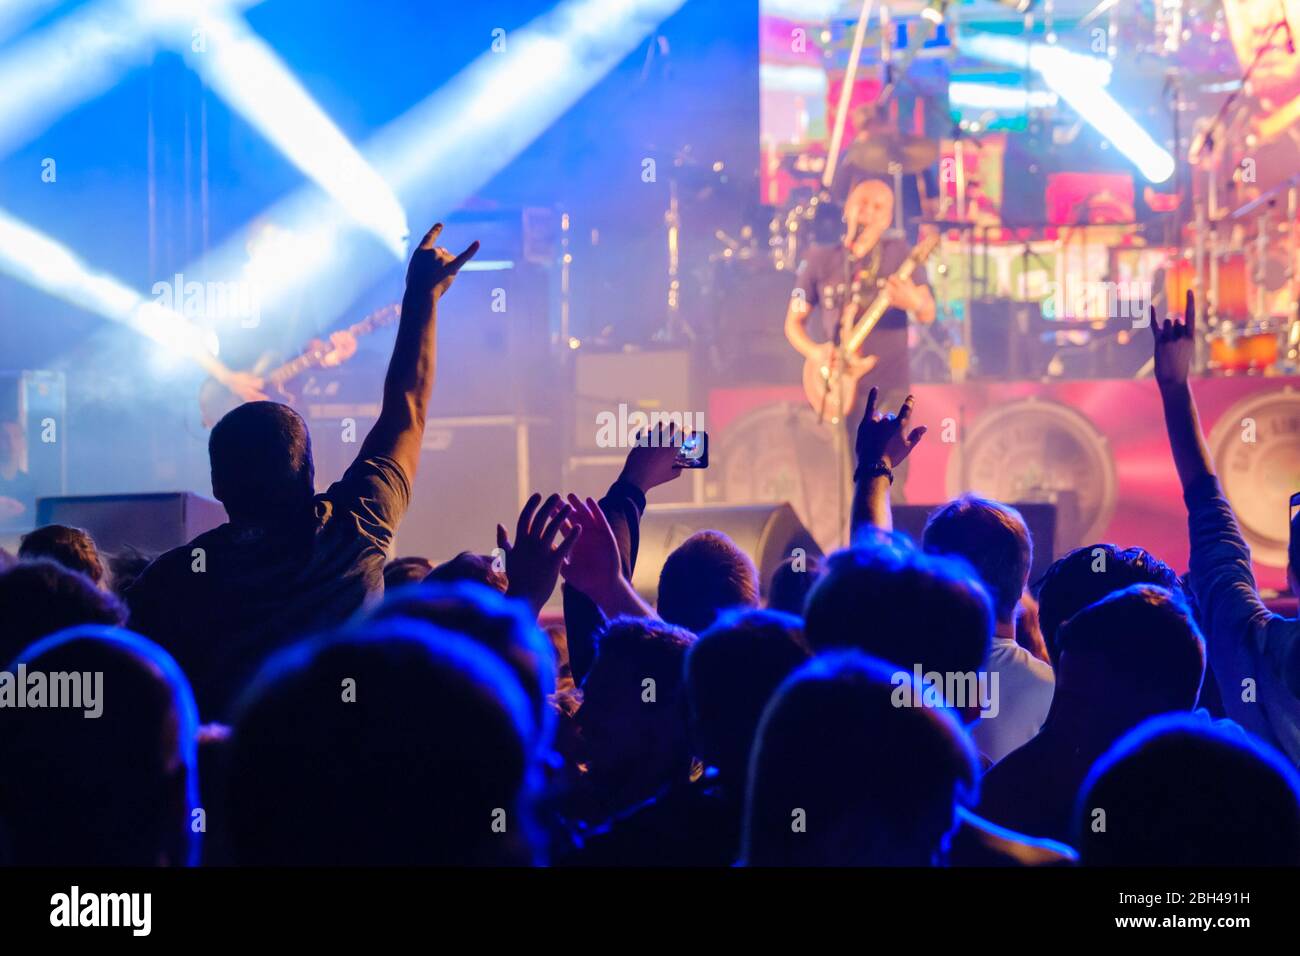 Silhouettes of people enjoying live concert of musician band performing  song on stage in bright spotlights Stock Photo - Alamy